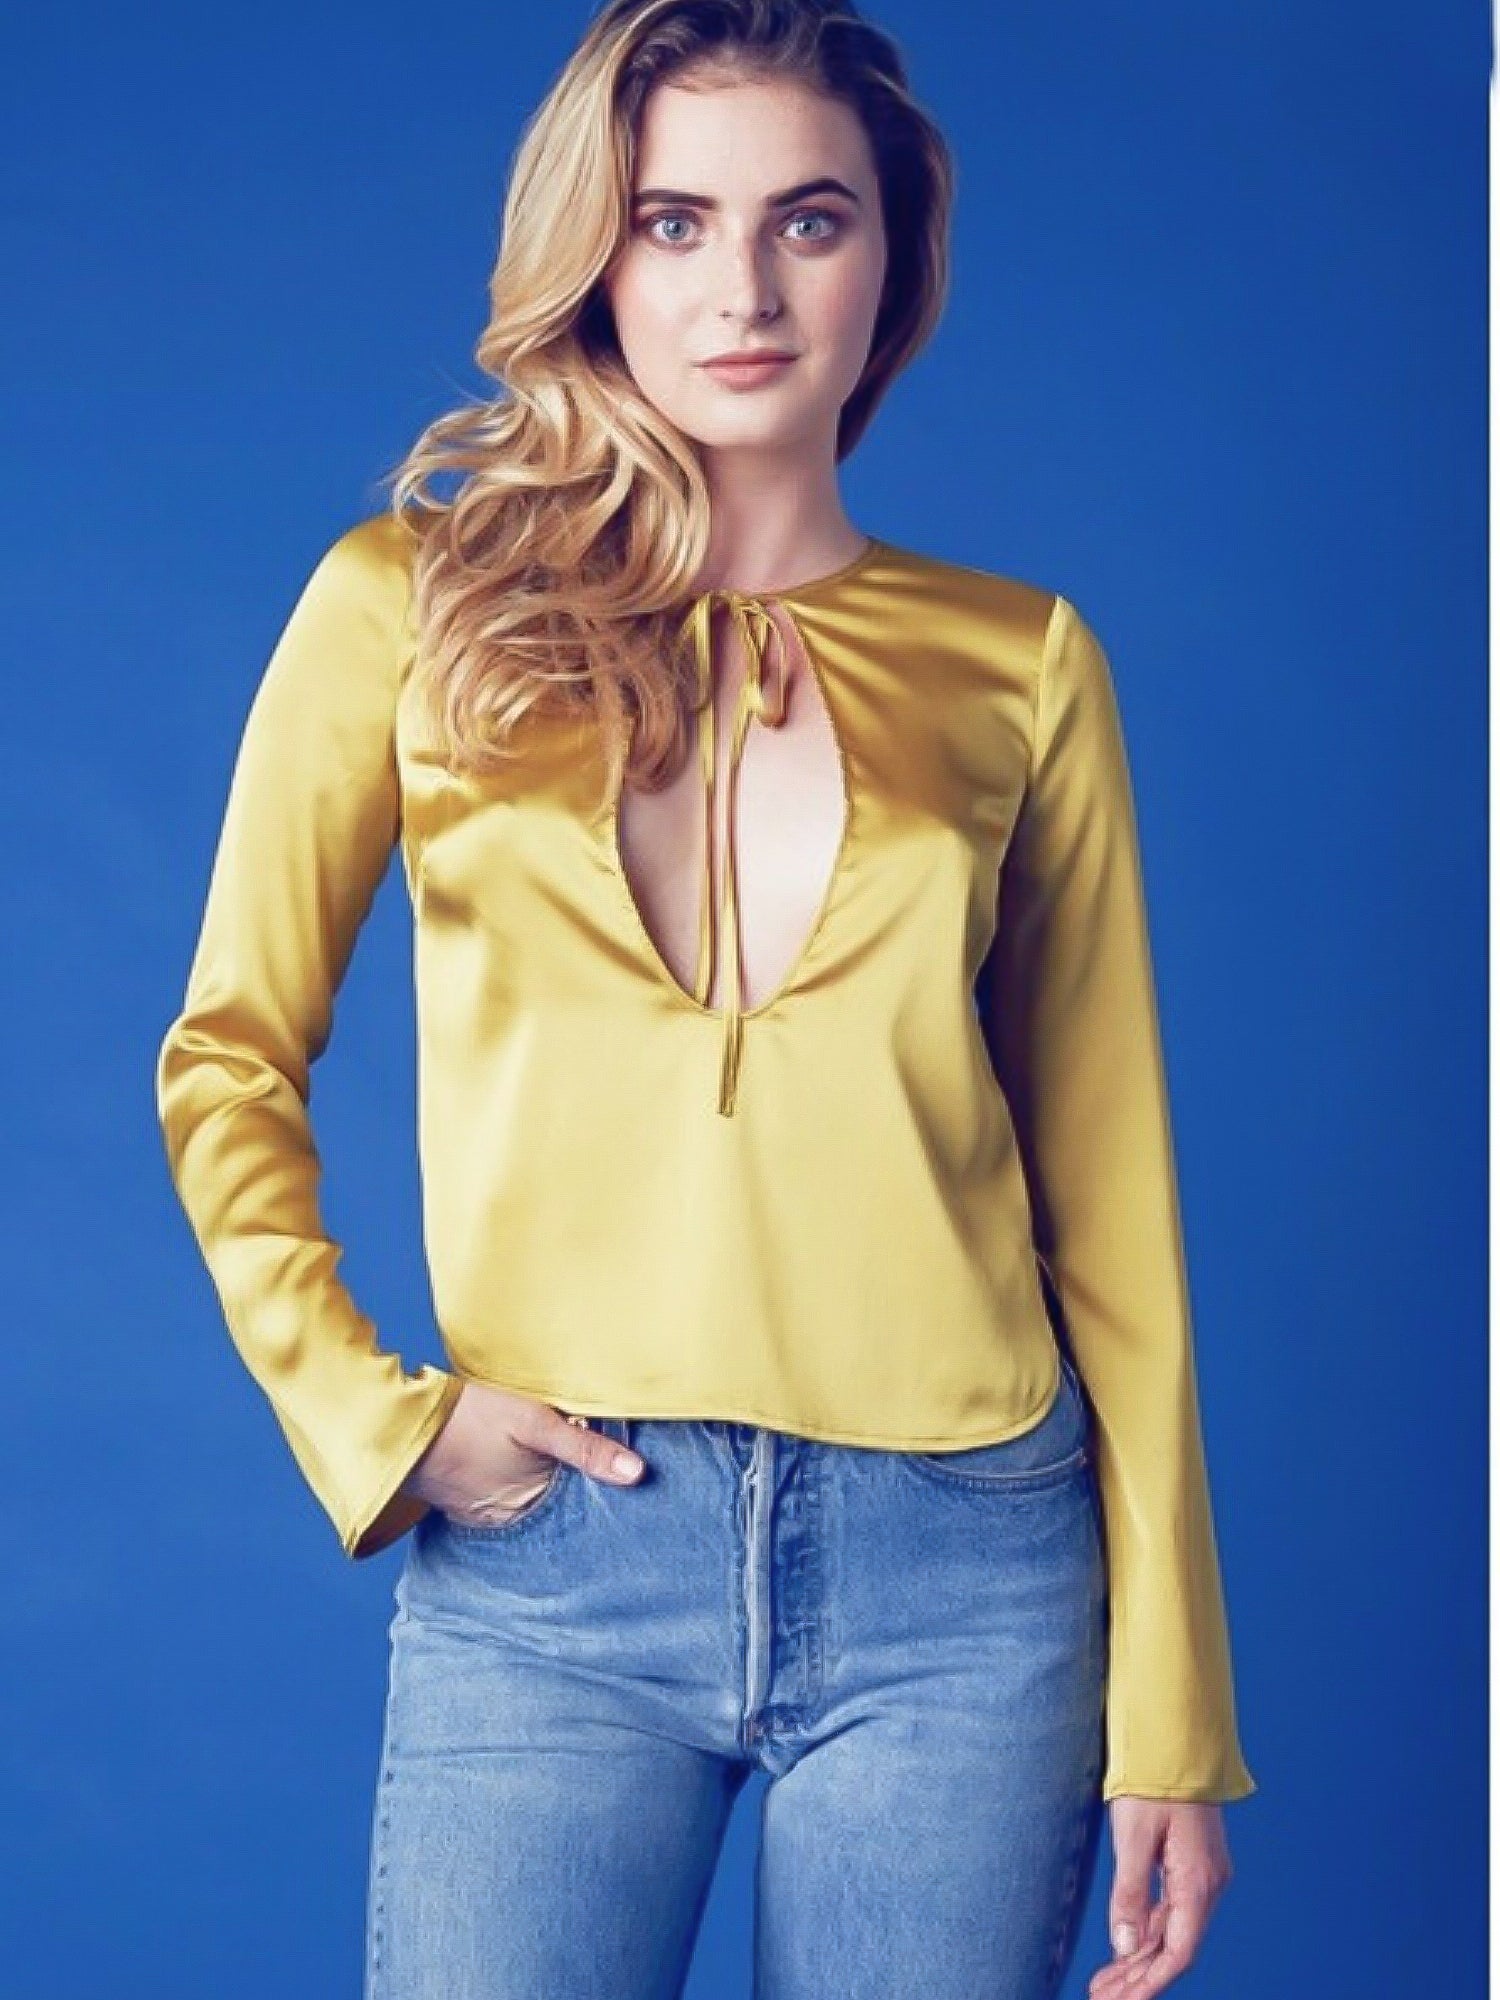 The Lemon Meringue Long Sleeved Blouse - The Lemon Meringue Long Sleeved Blouse is a satin tie blouse has been designed to create a unique appeal. Featuring a deep key hole cut in the chest, it also has a neck tie around the collar. The soft and smooth sa